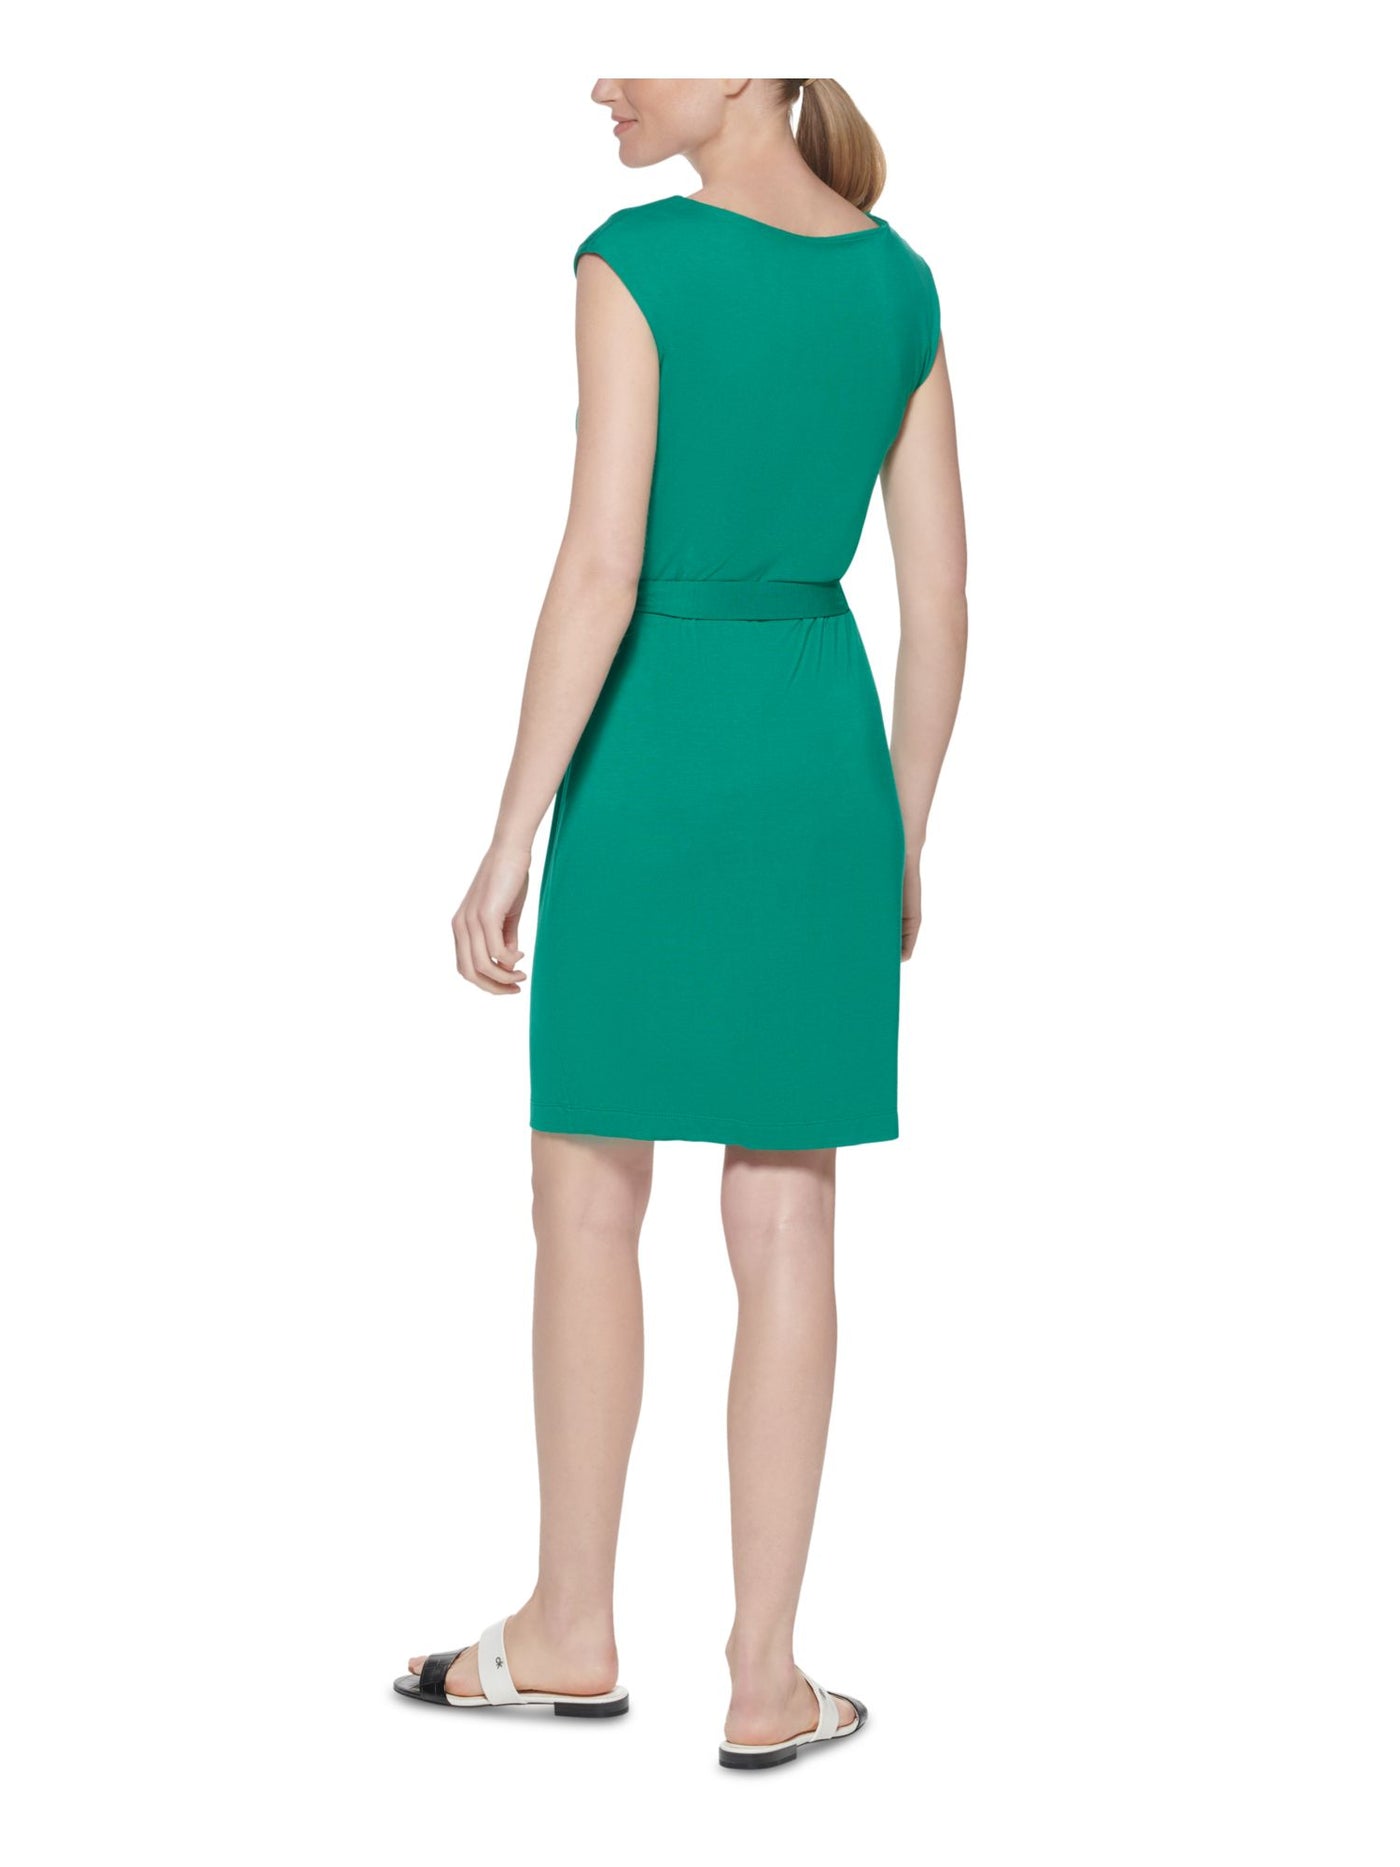 CALVIN KLEIN Womens Green Stretch Pleated Belted Pullover Styling Sleeveless Asymmetrical Neckline Above The Knee Sheath Dress 8